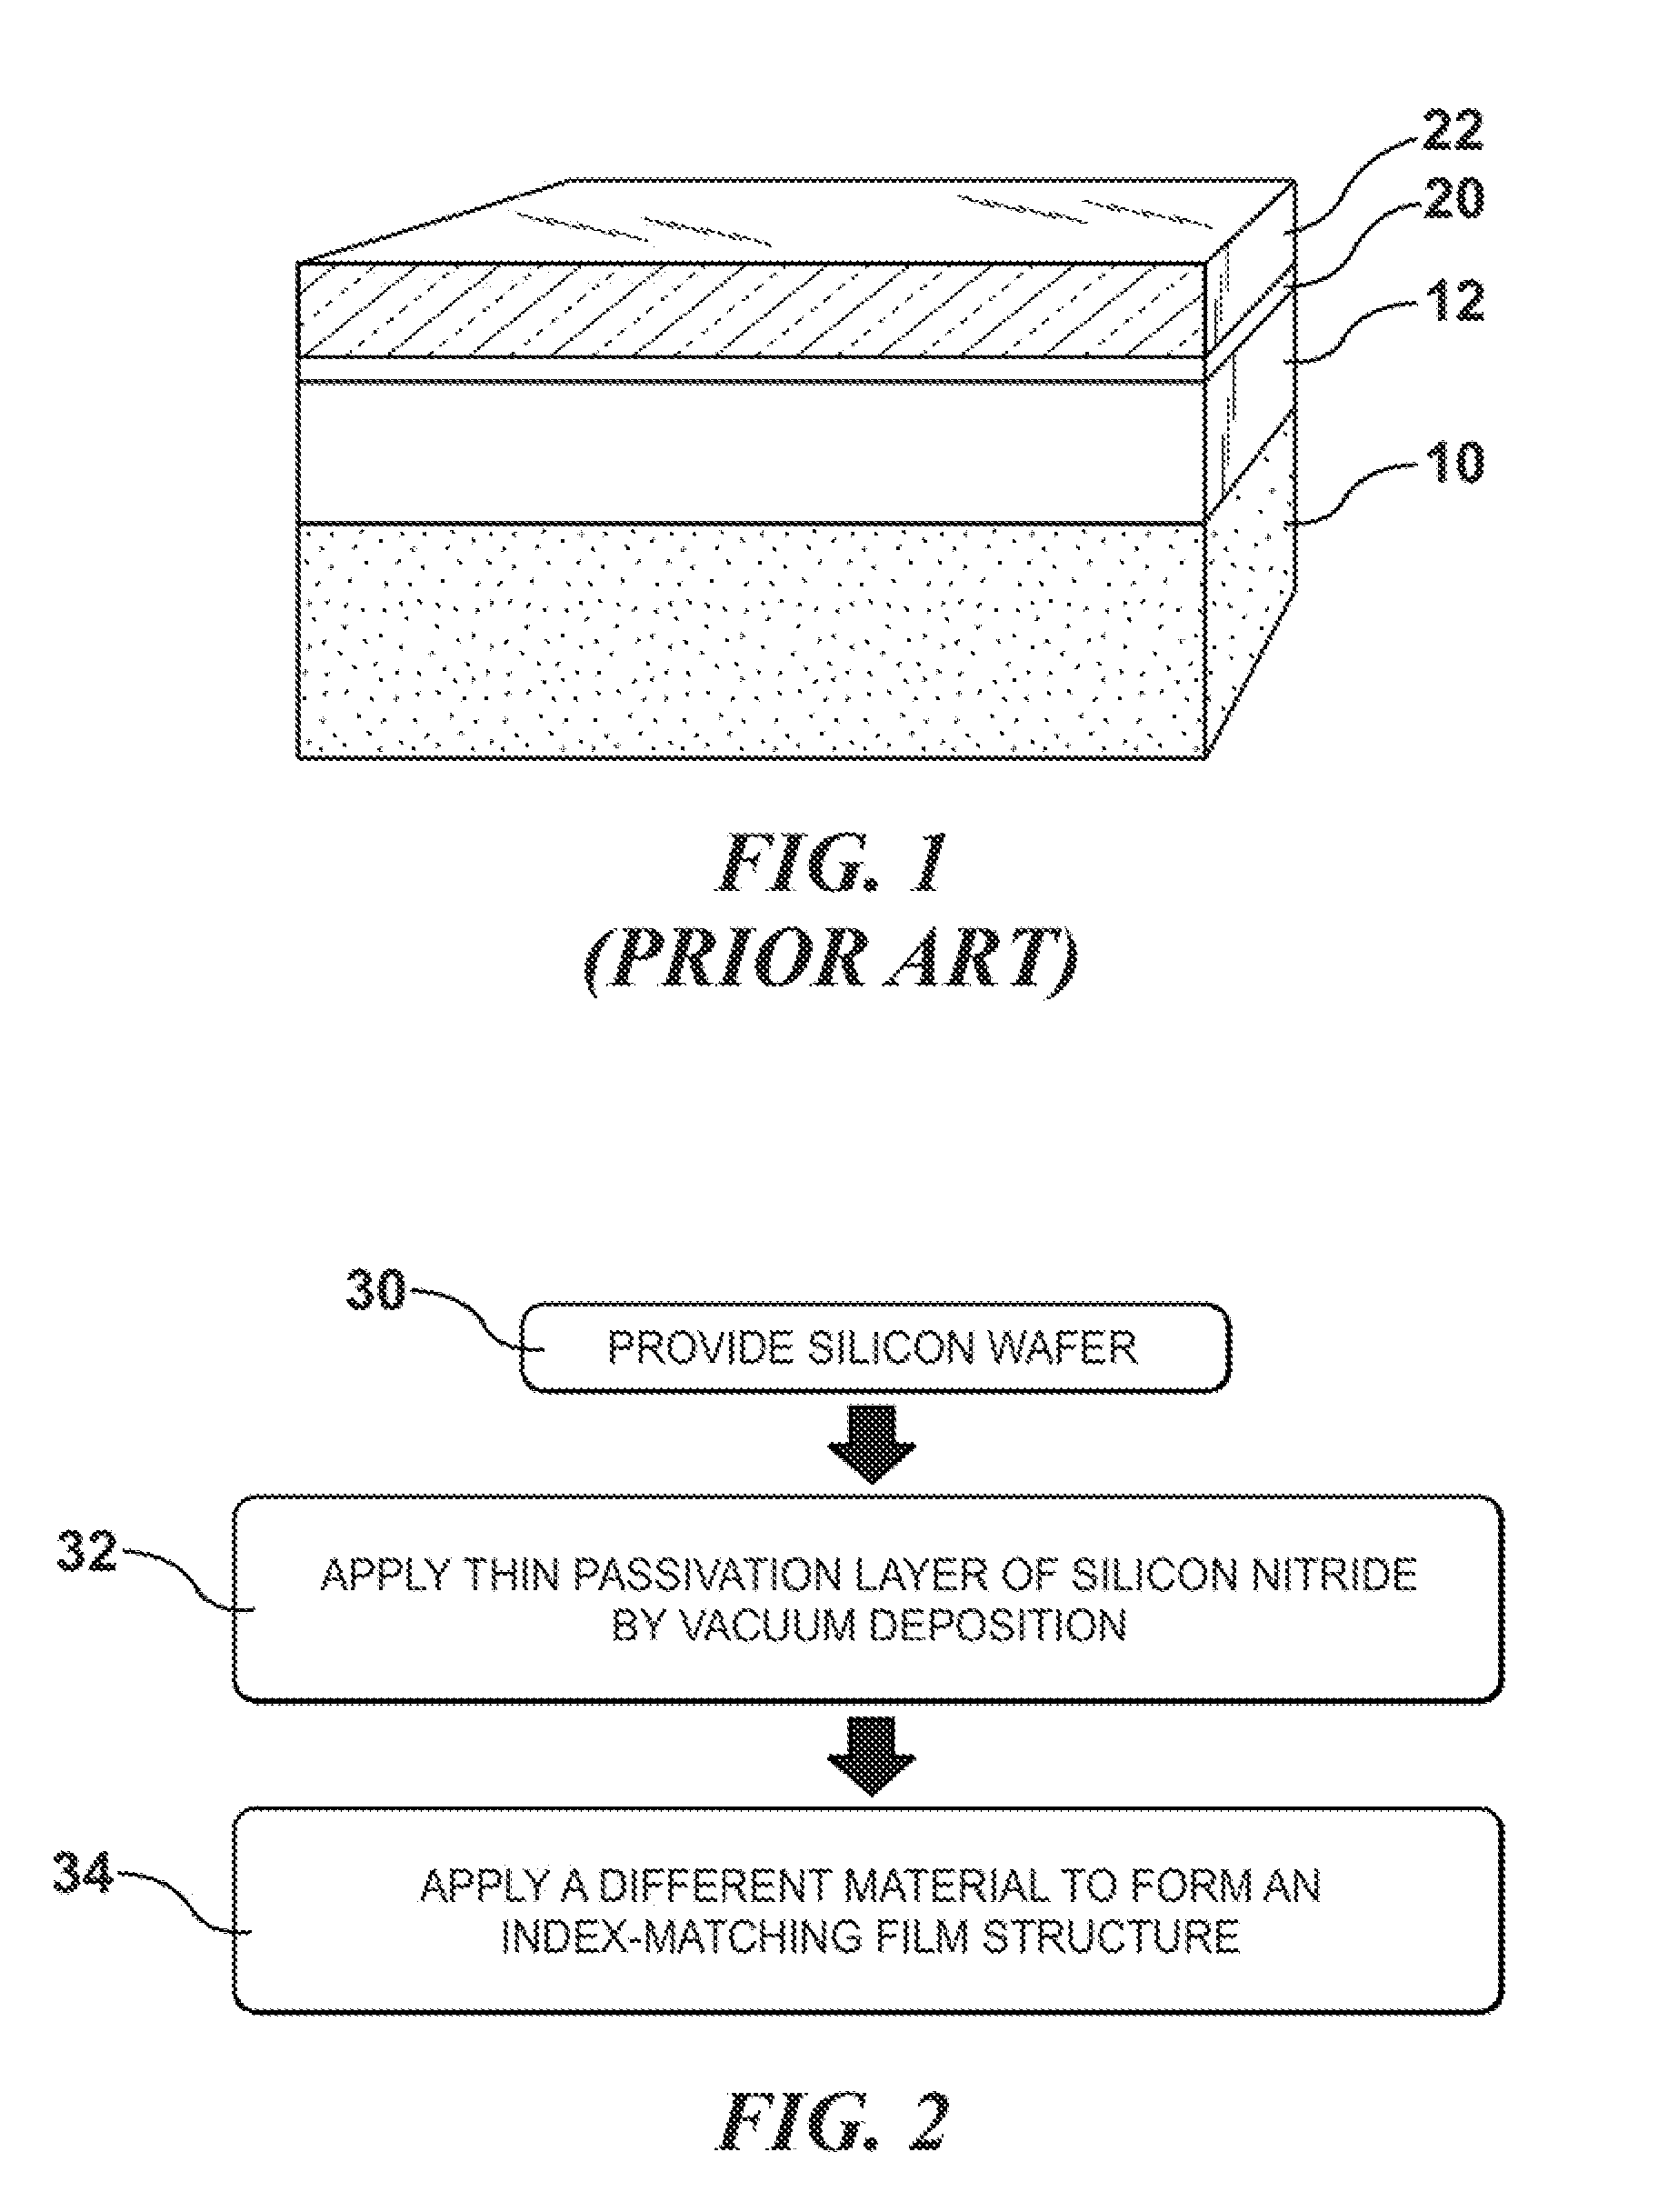 Method of Passivating and Reducing Reflectance of a Photovoltaic Cell